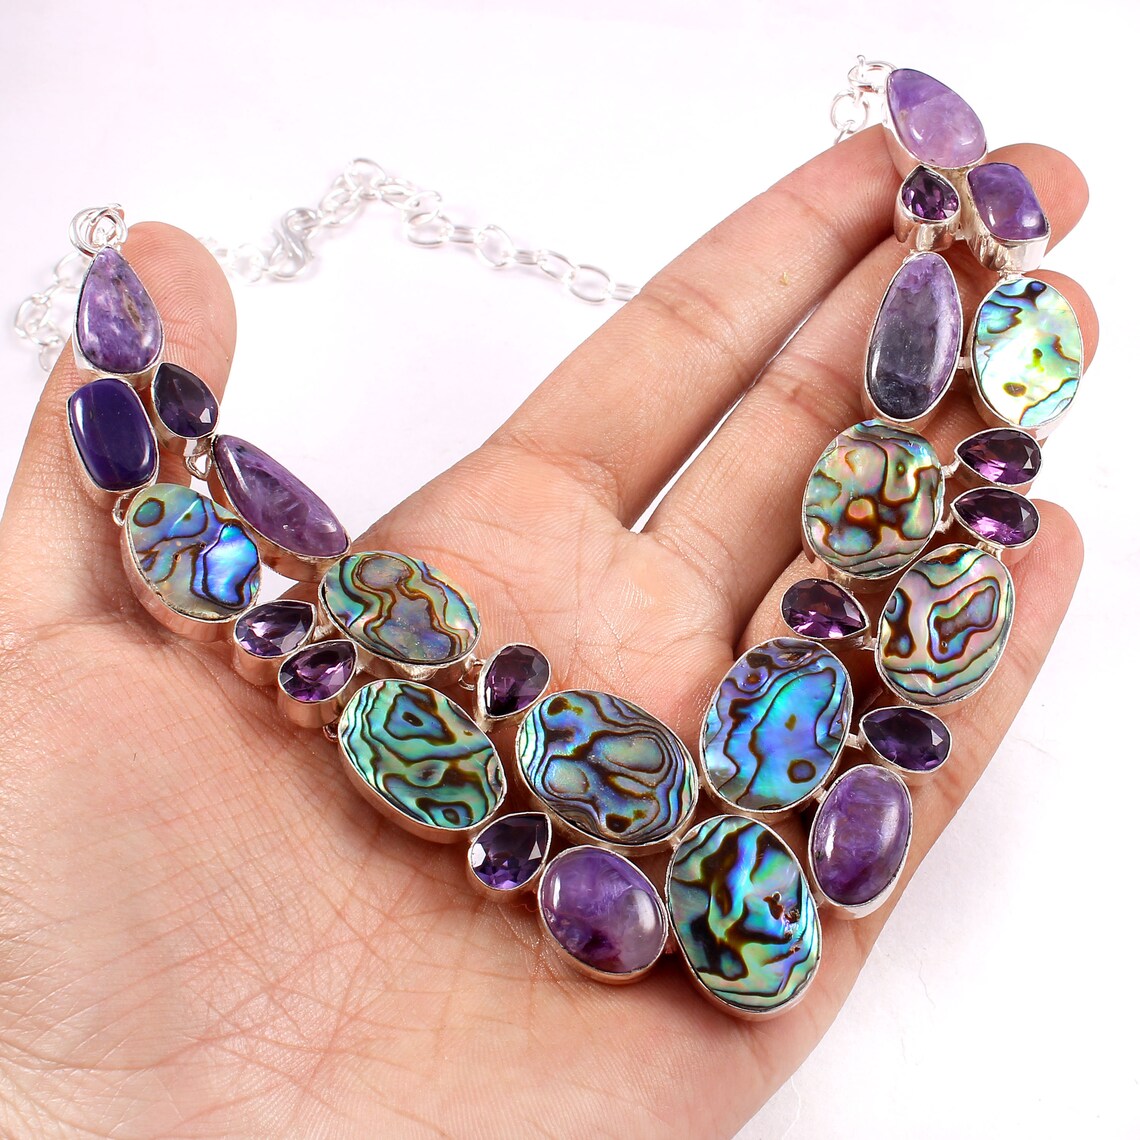 Purple Charoite ,Abalone Shell And Amethyst 925 Sterling Silver Bib Necklace